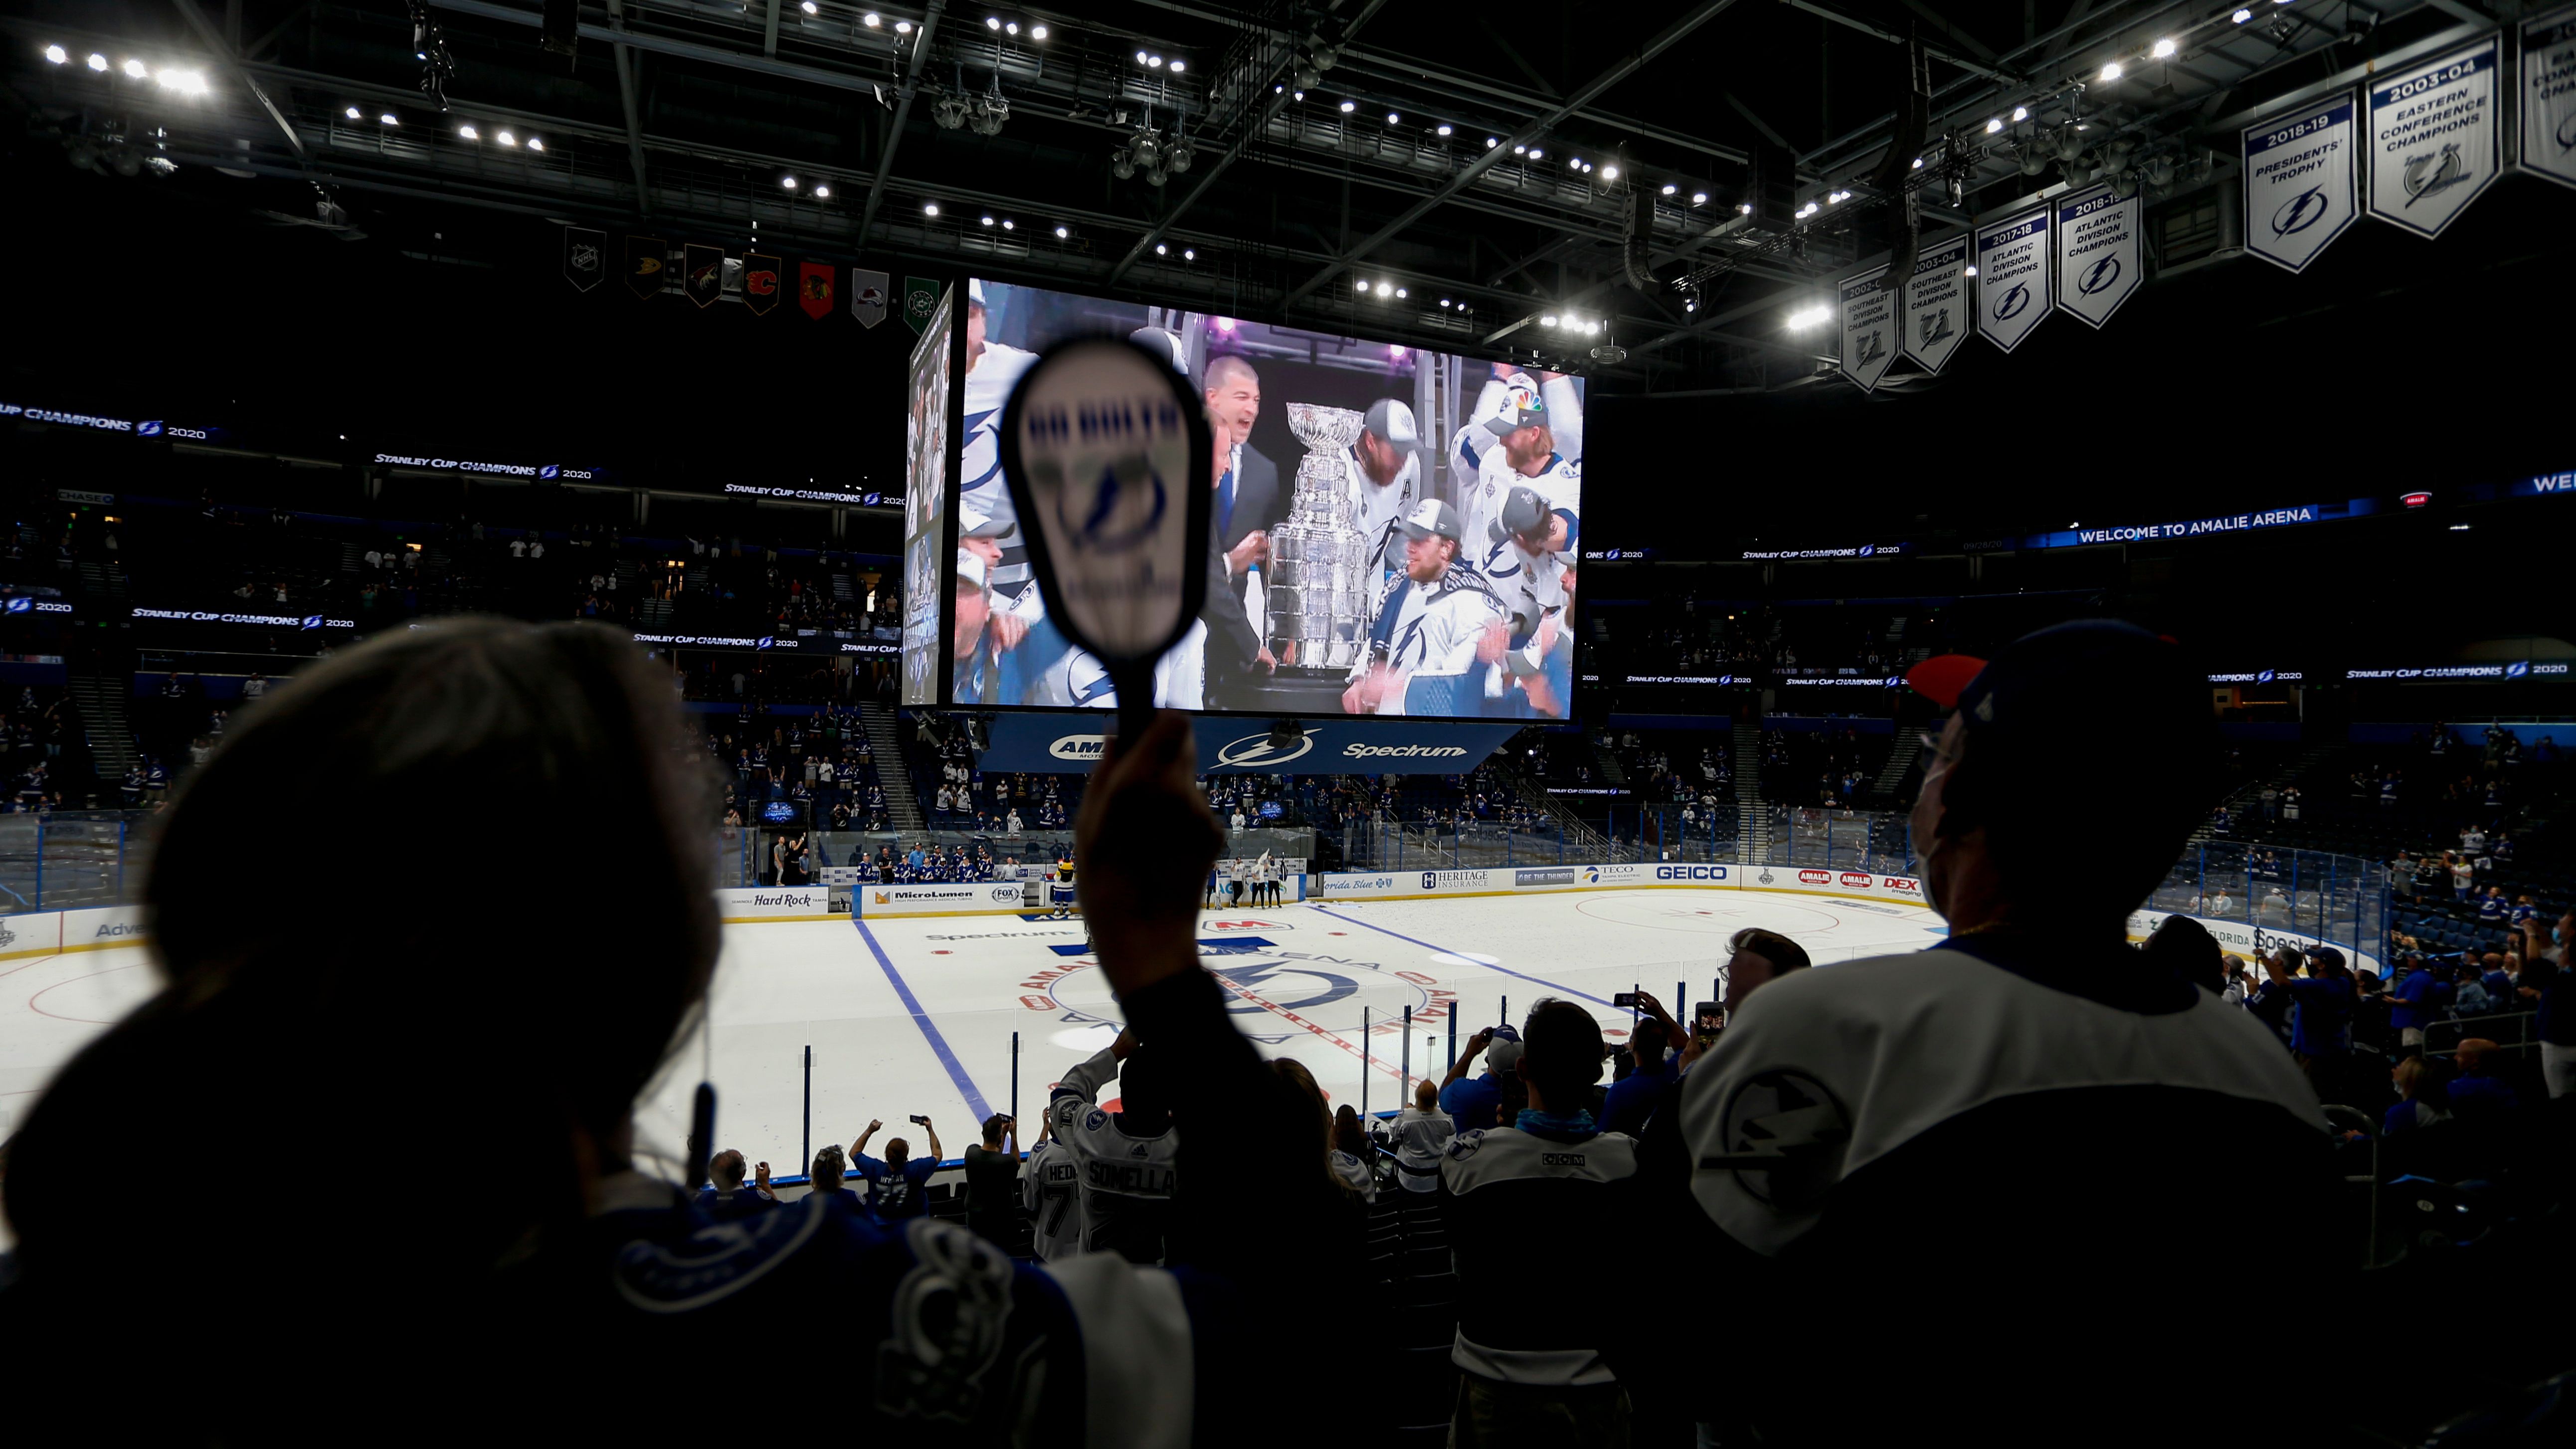 Tampa Bay Lightning fans share superstitions and rituals for a Stanley Cup  victory